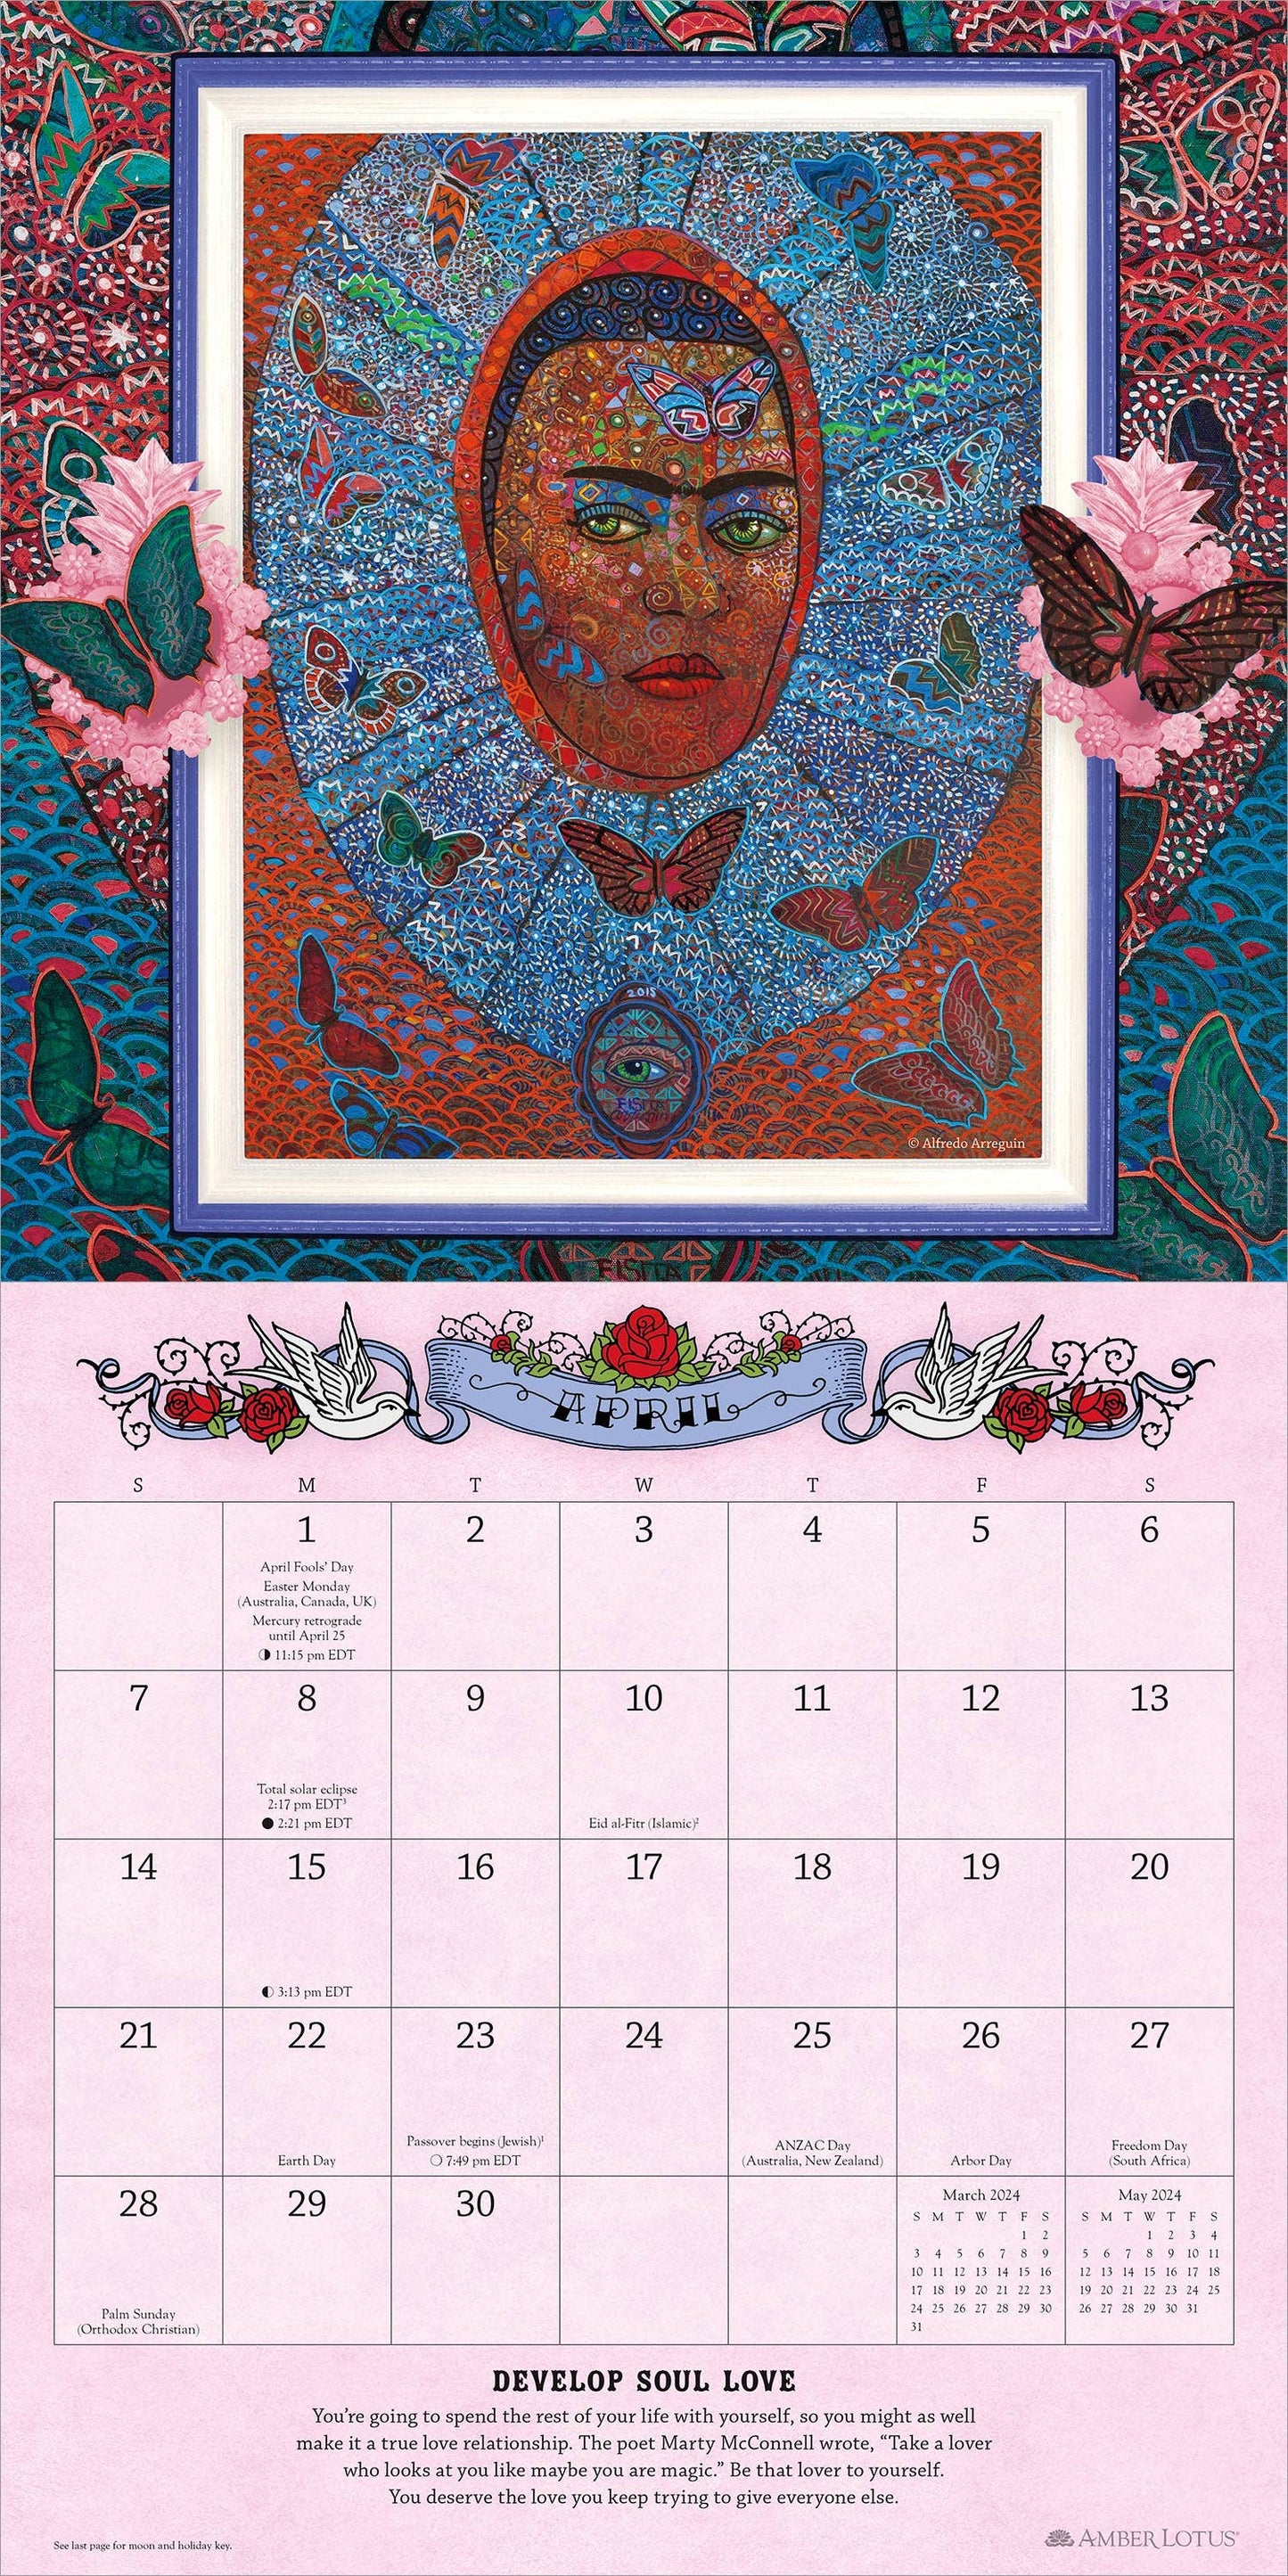 For the Love of Frida 2024 Wall Calendar